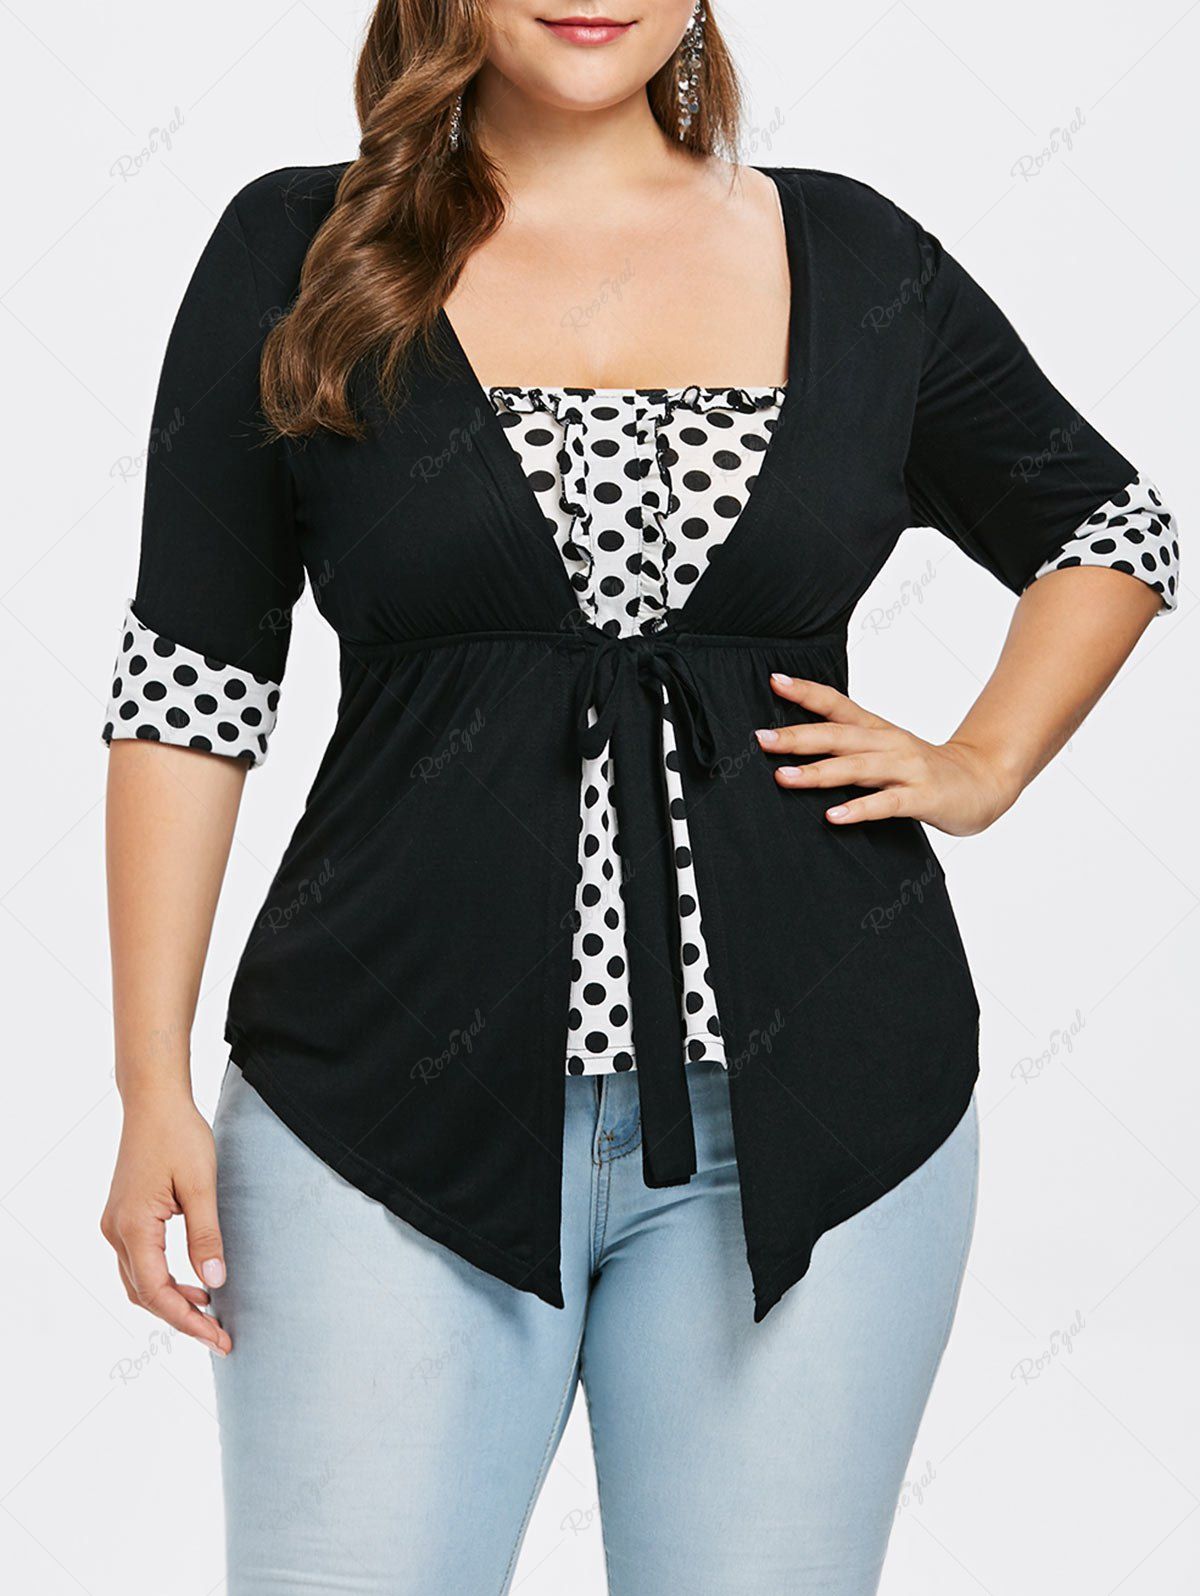 Best Plus Size Tie Ruffles Ruched Polka Dot T-shirt  